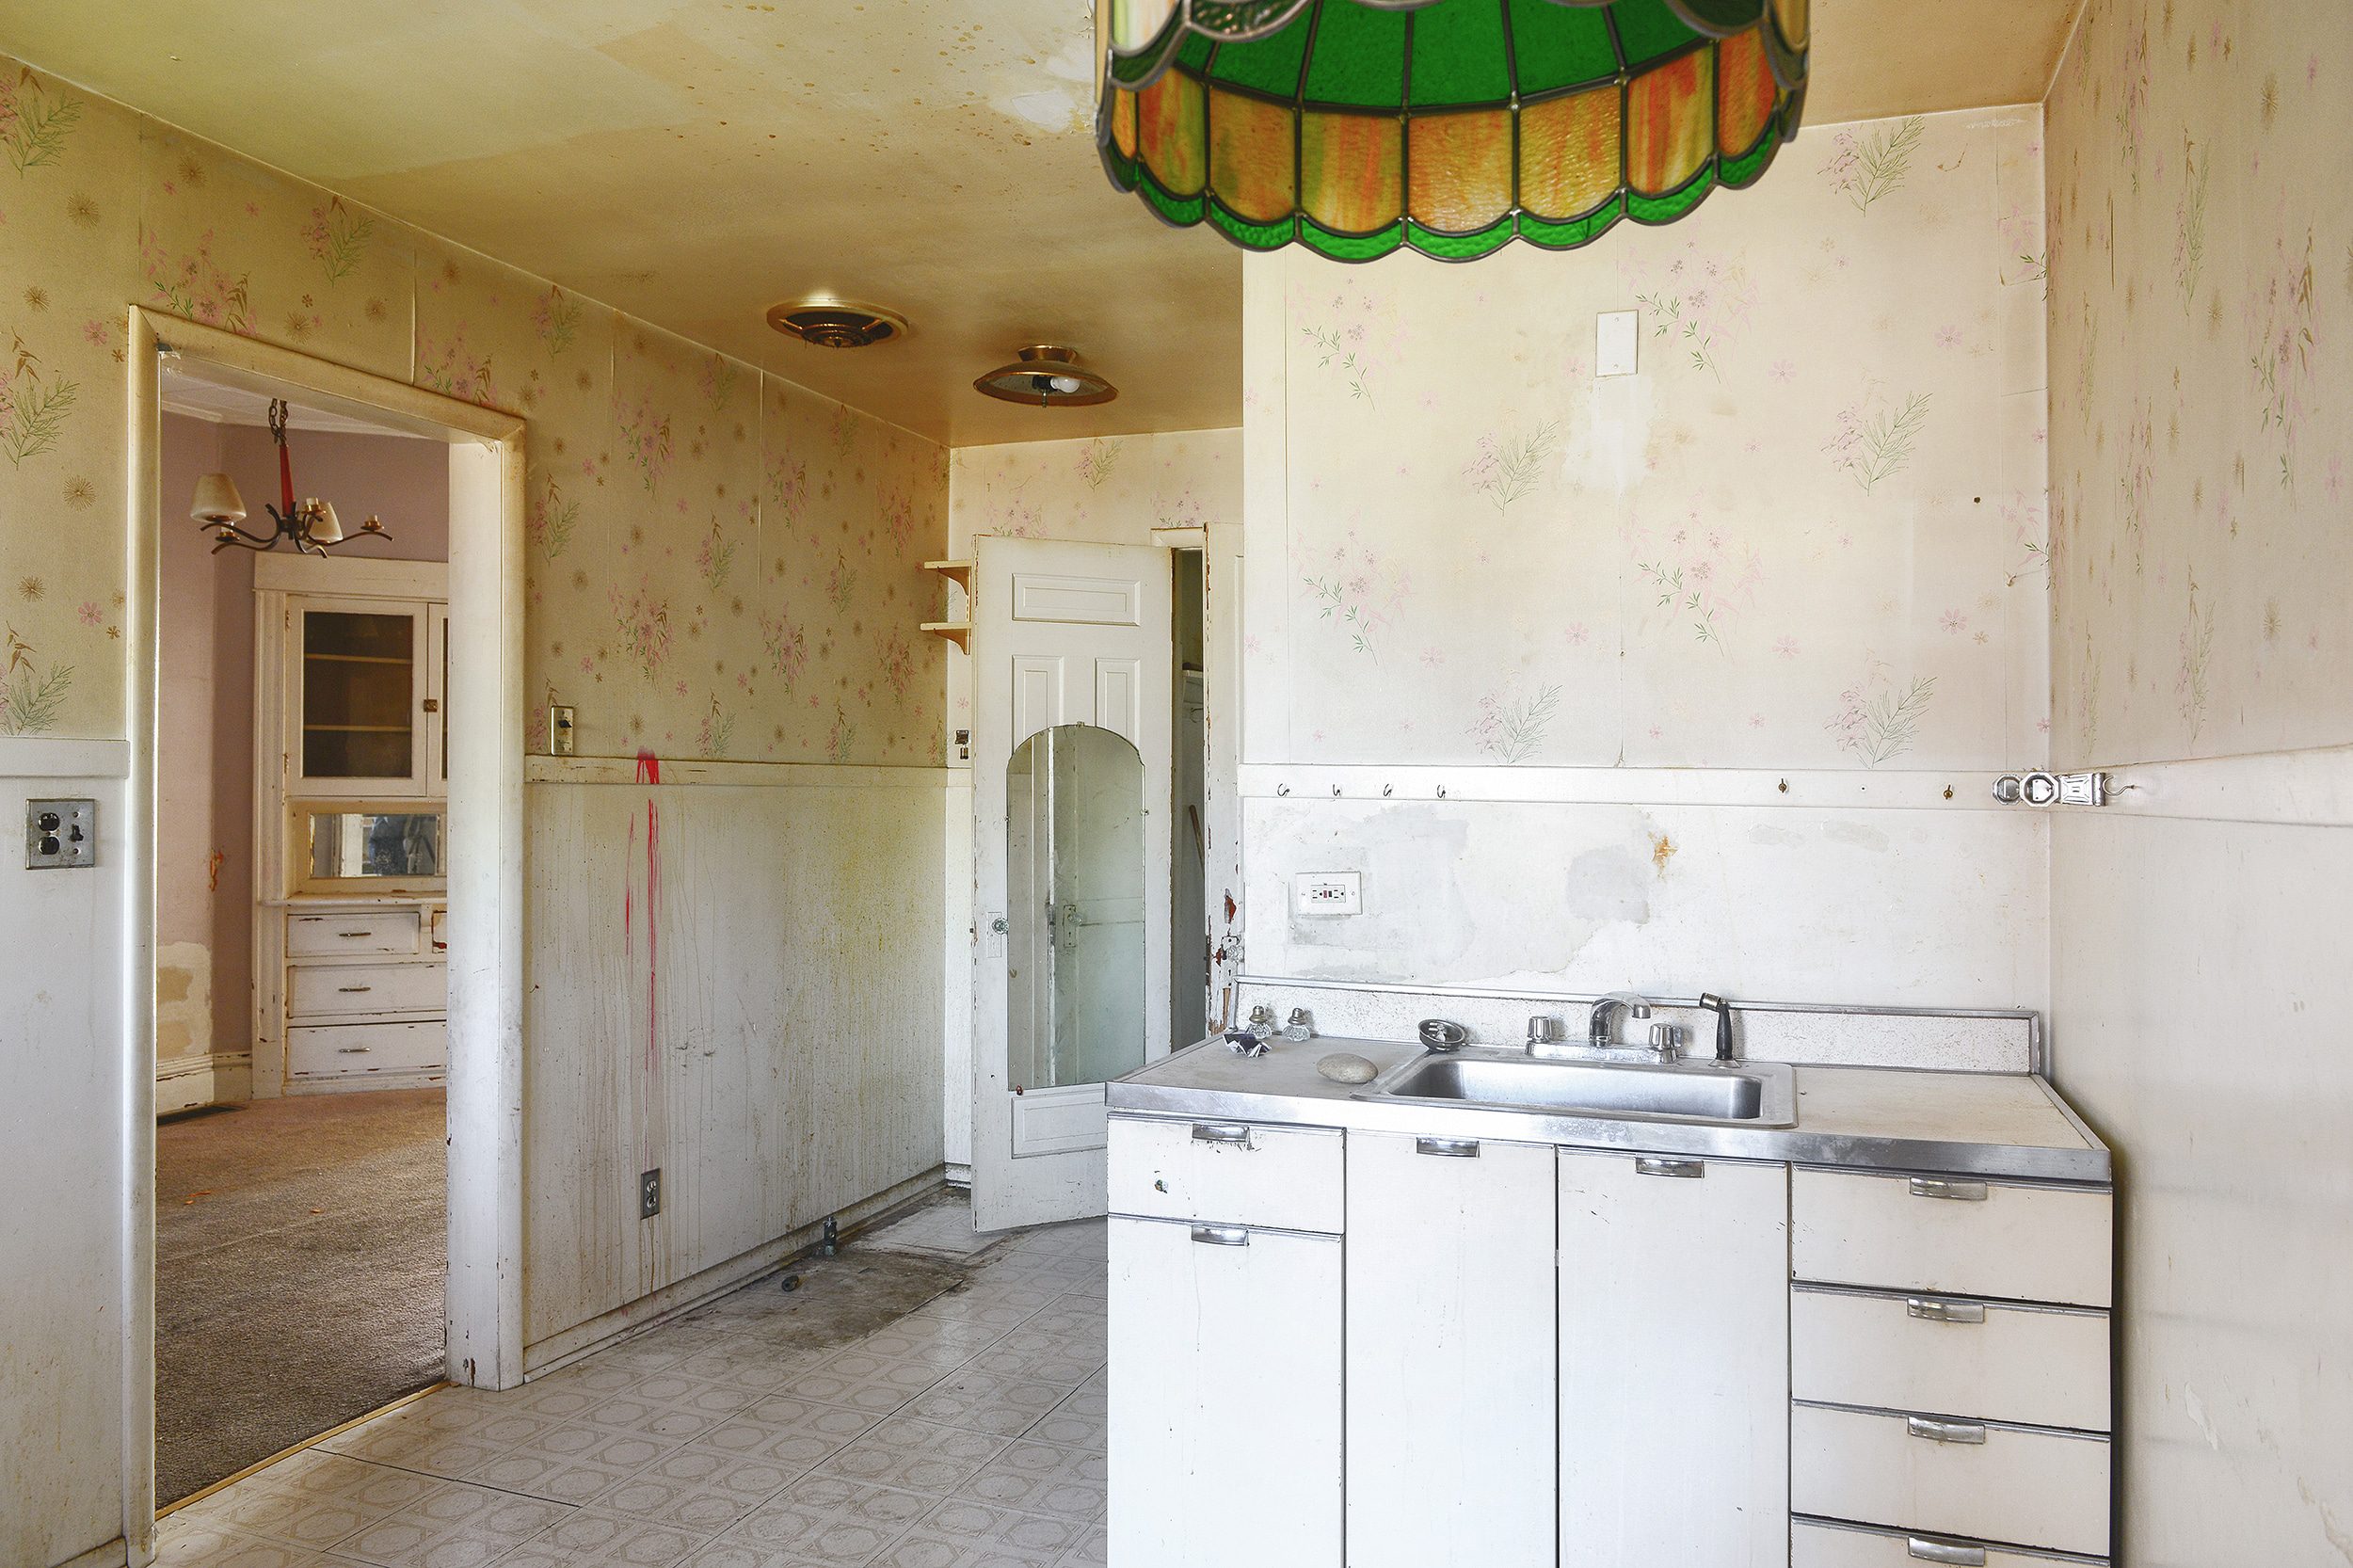 A before photo, view from the kitchen | via Yellow Brick Home